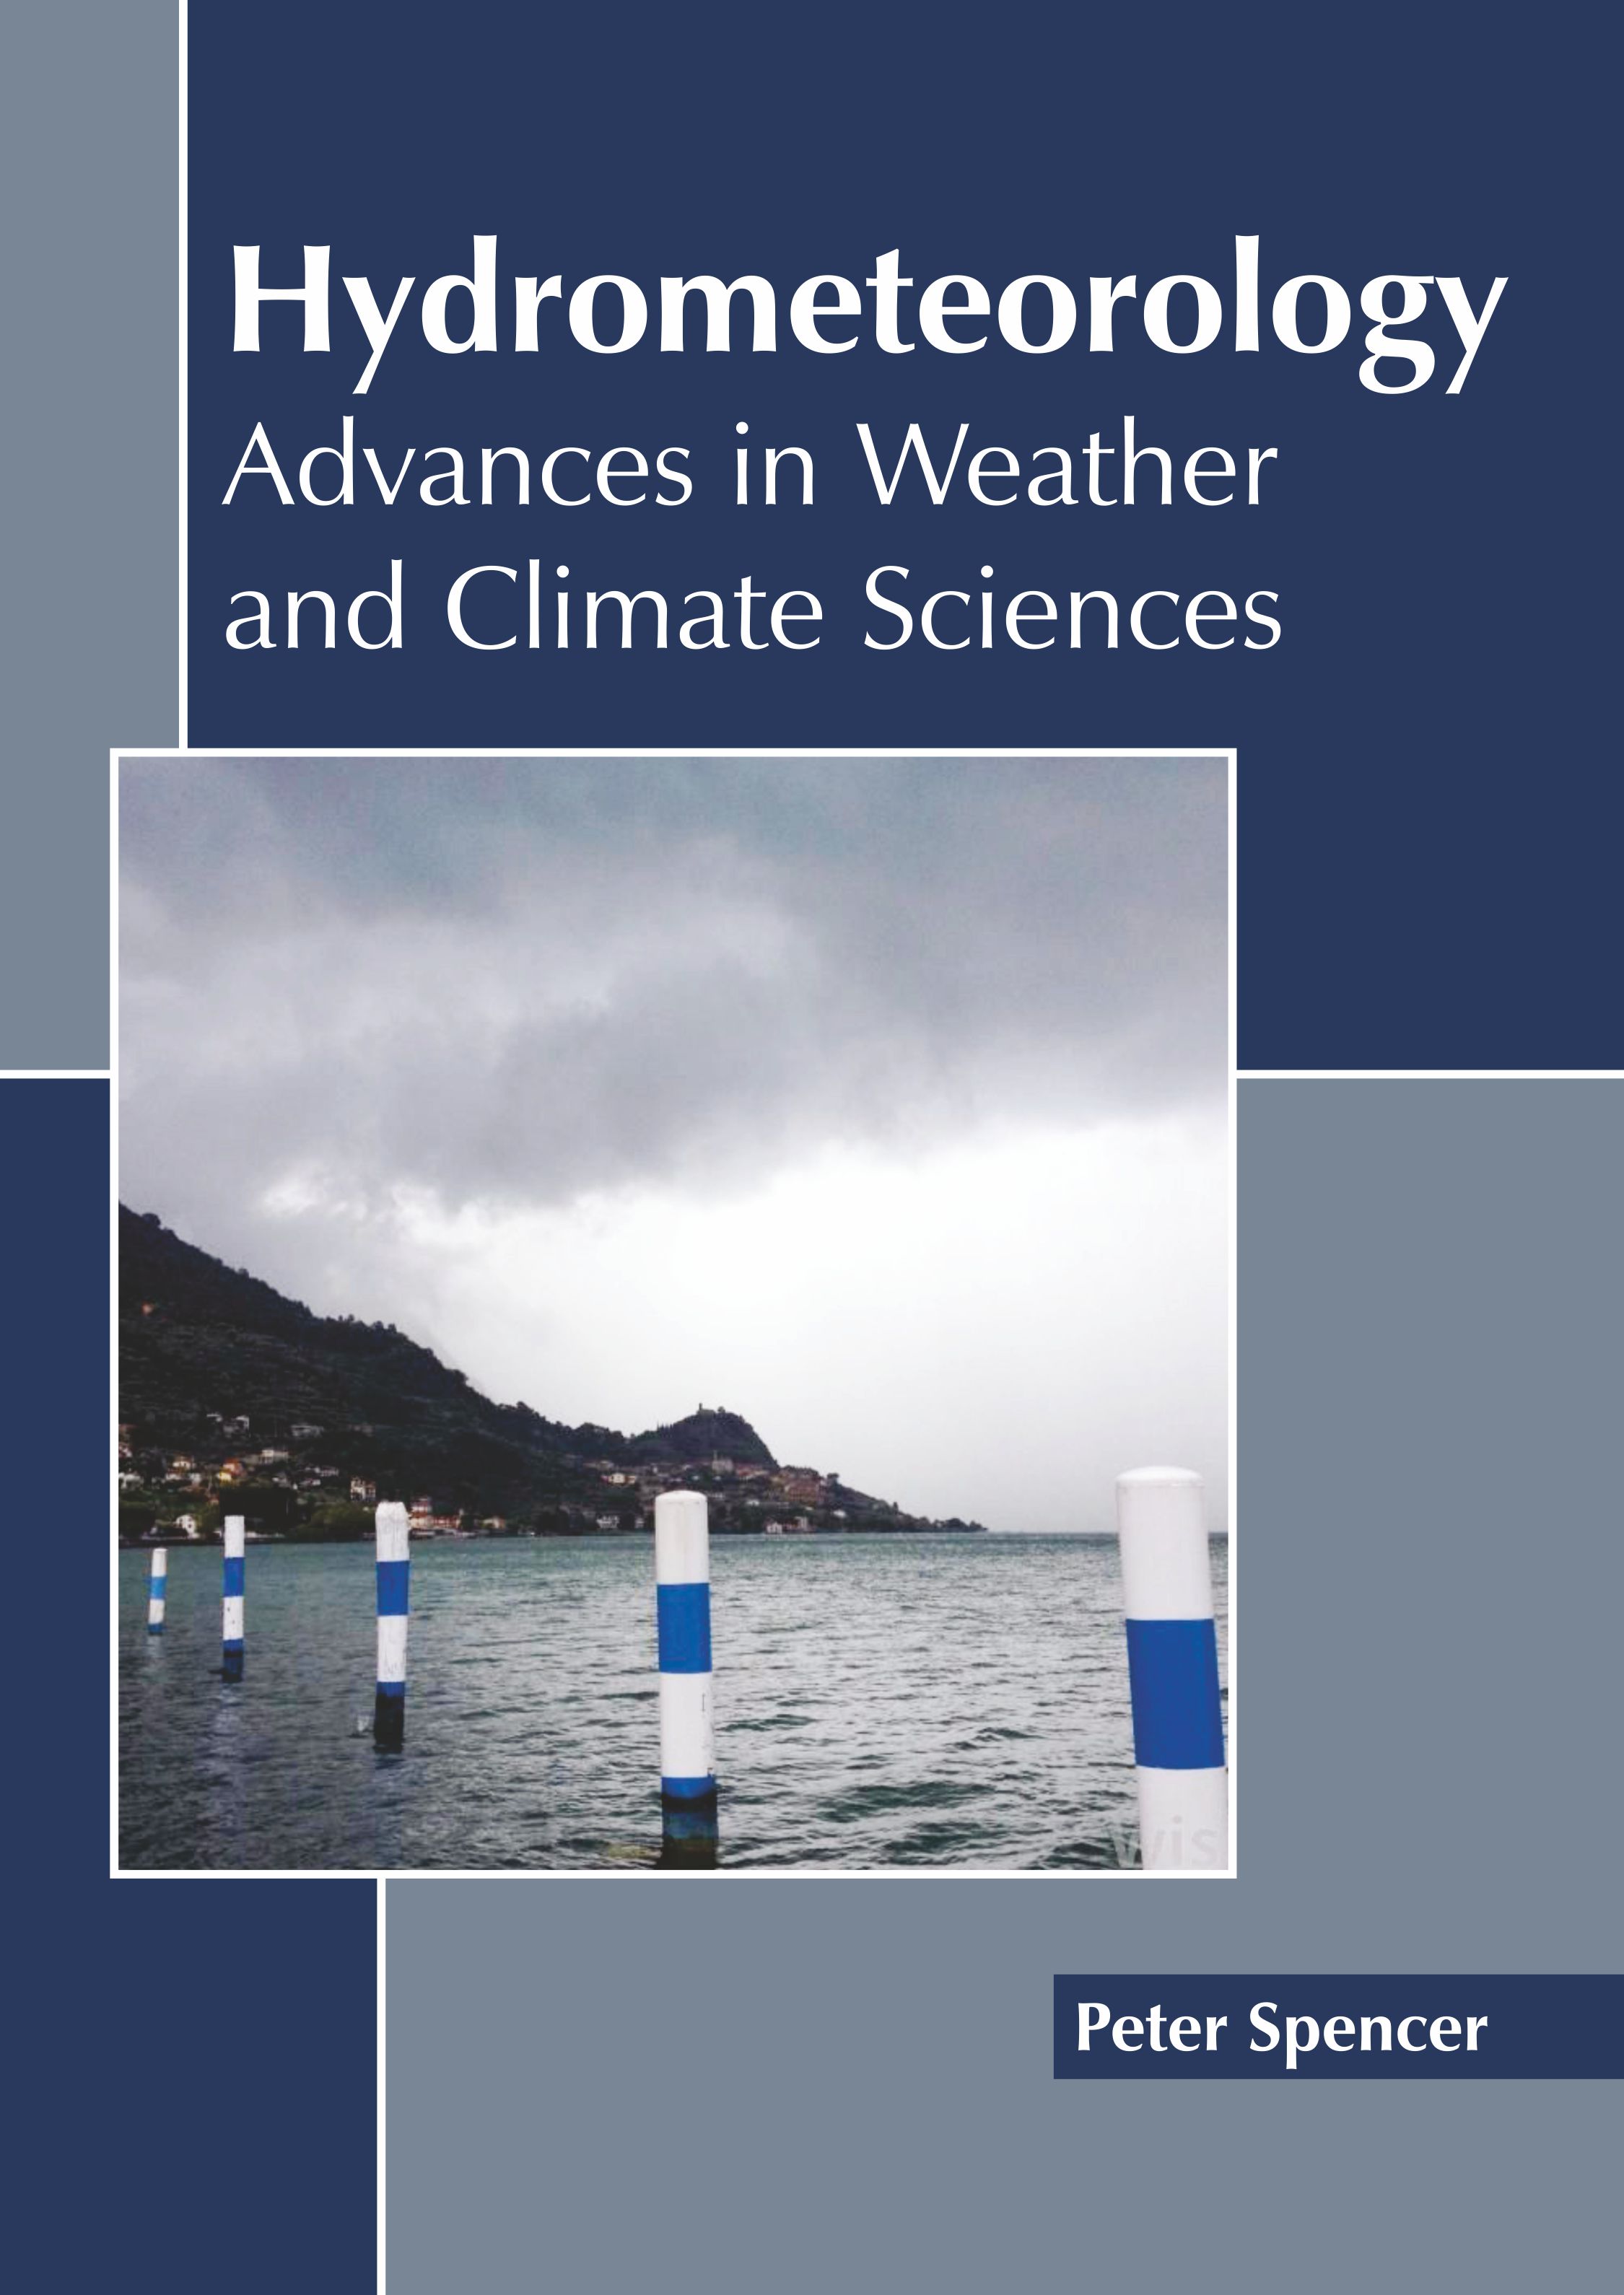 Hydrometeorology: Advances in Weather and Climate Sciences